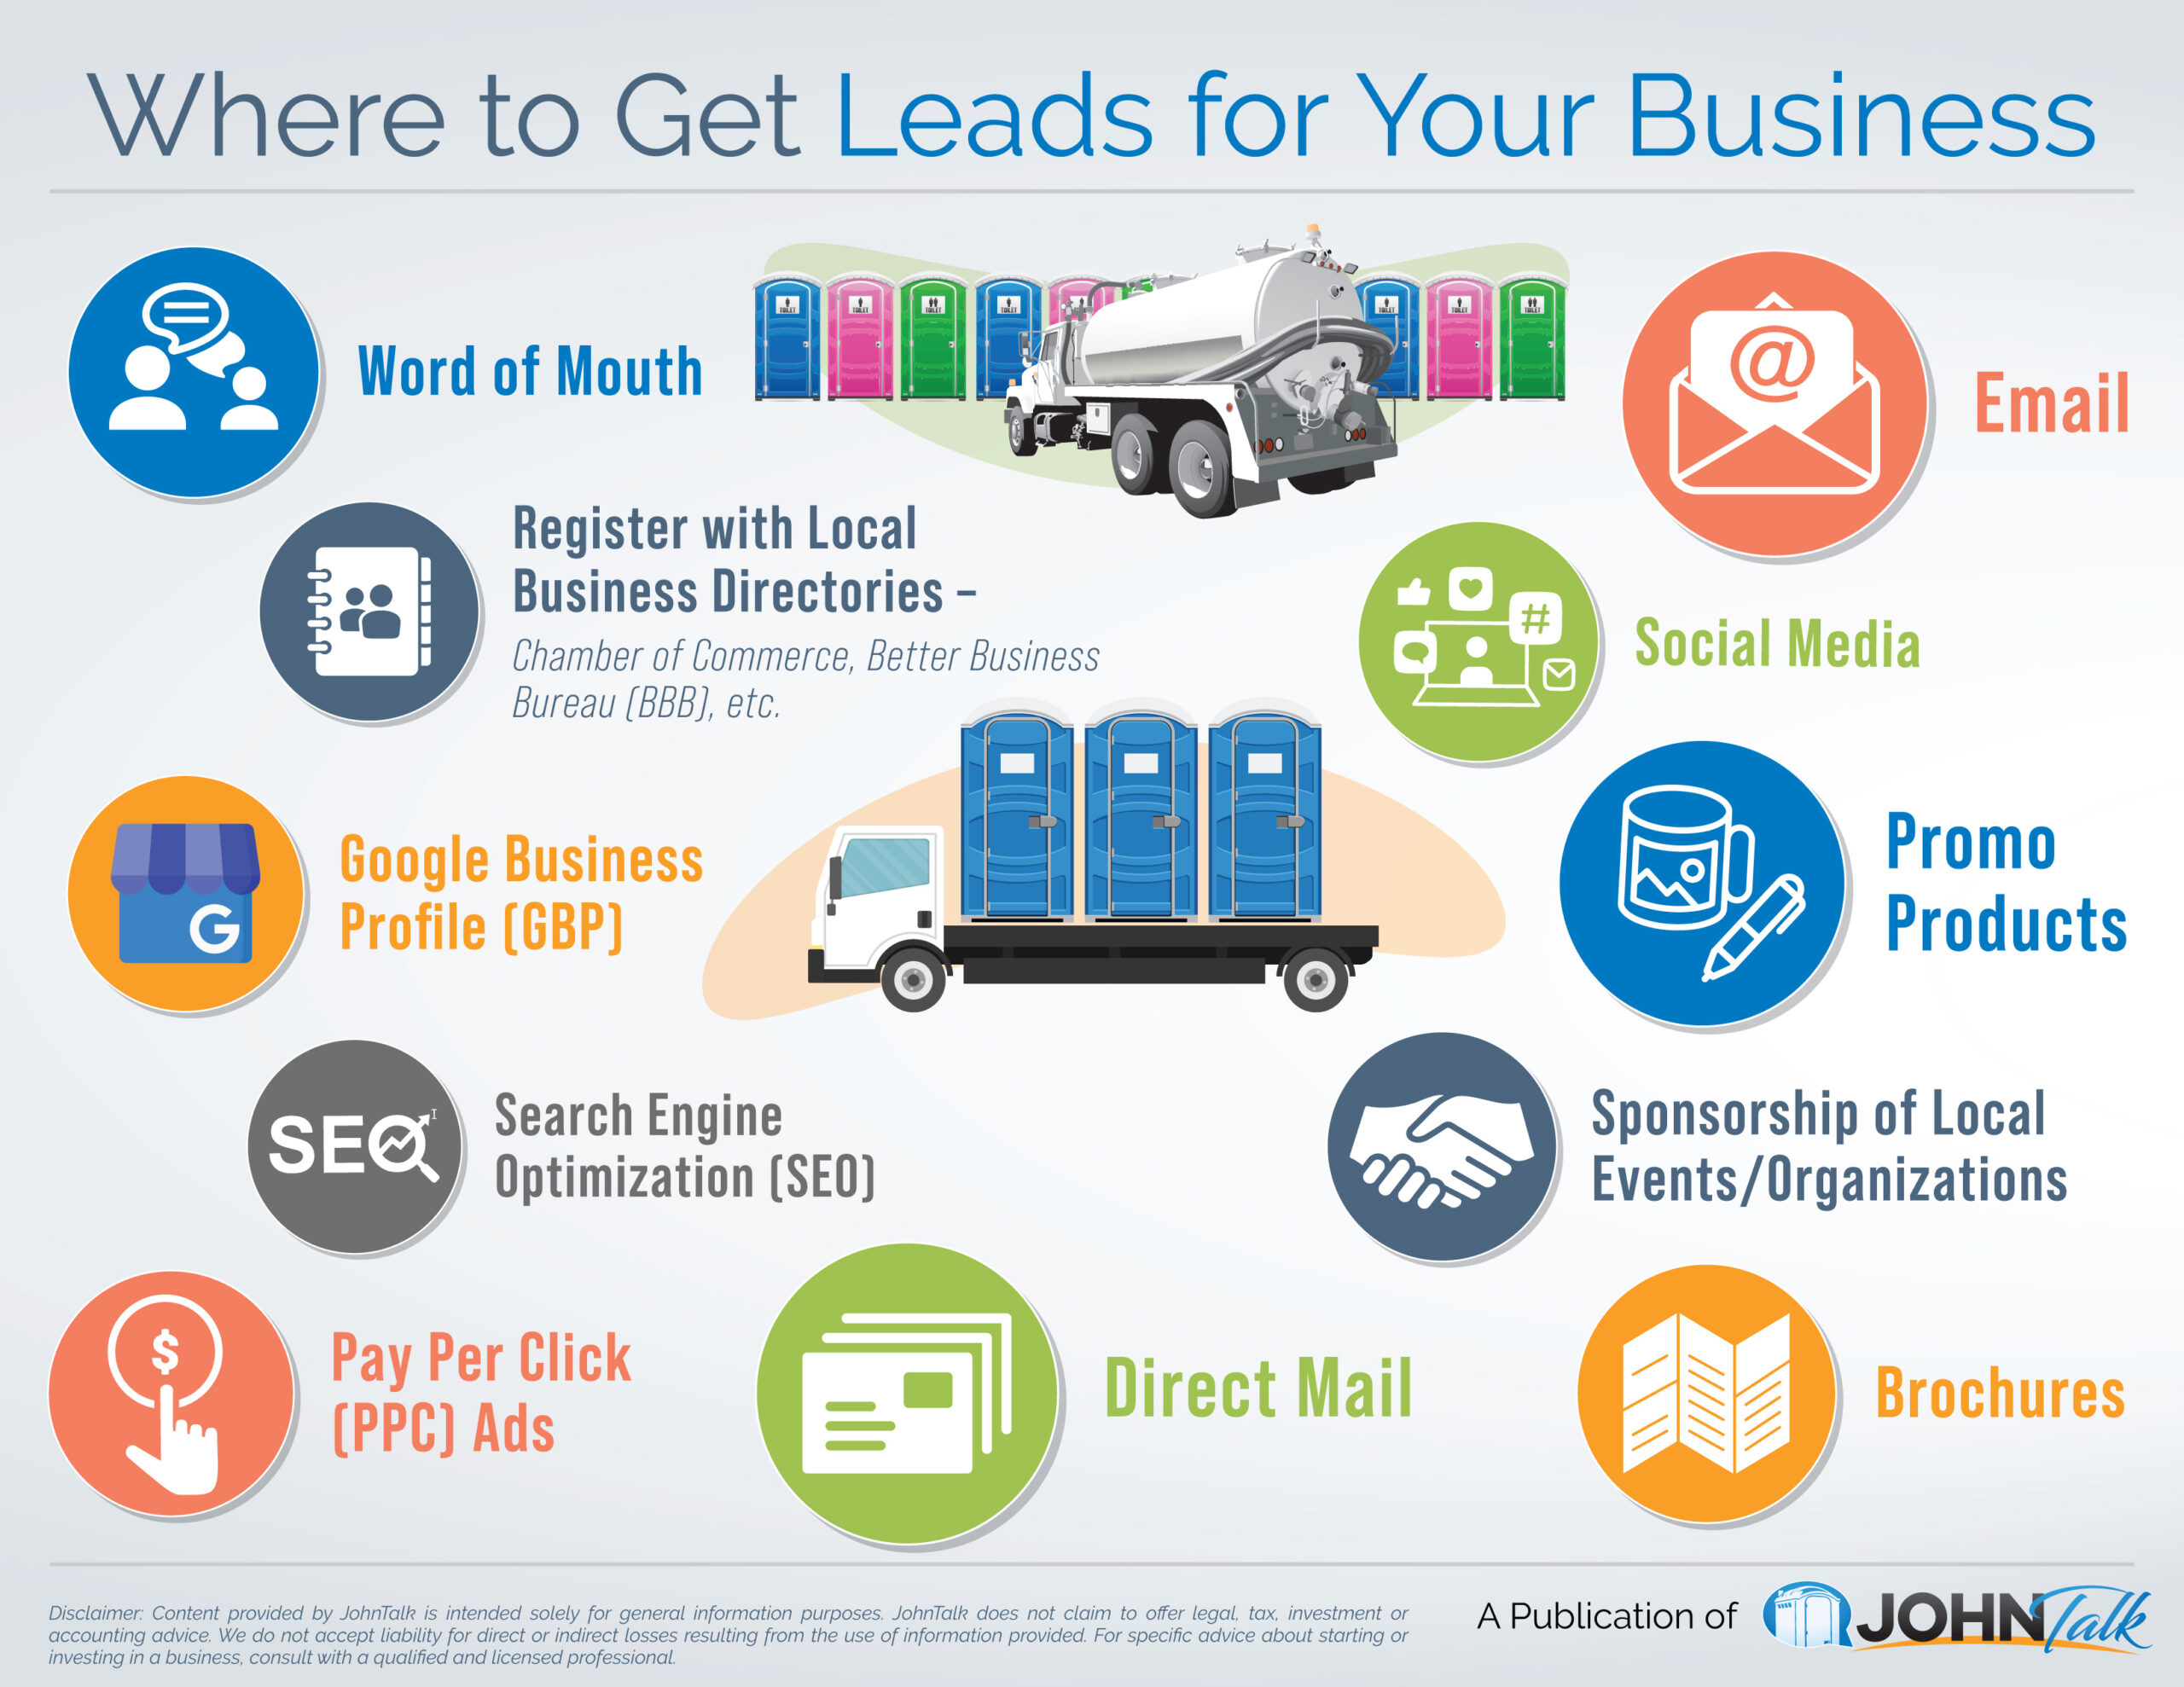 Where to Get Leads for Your Business